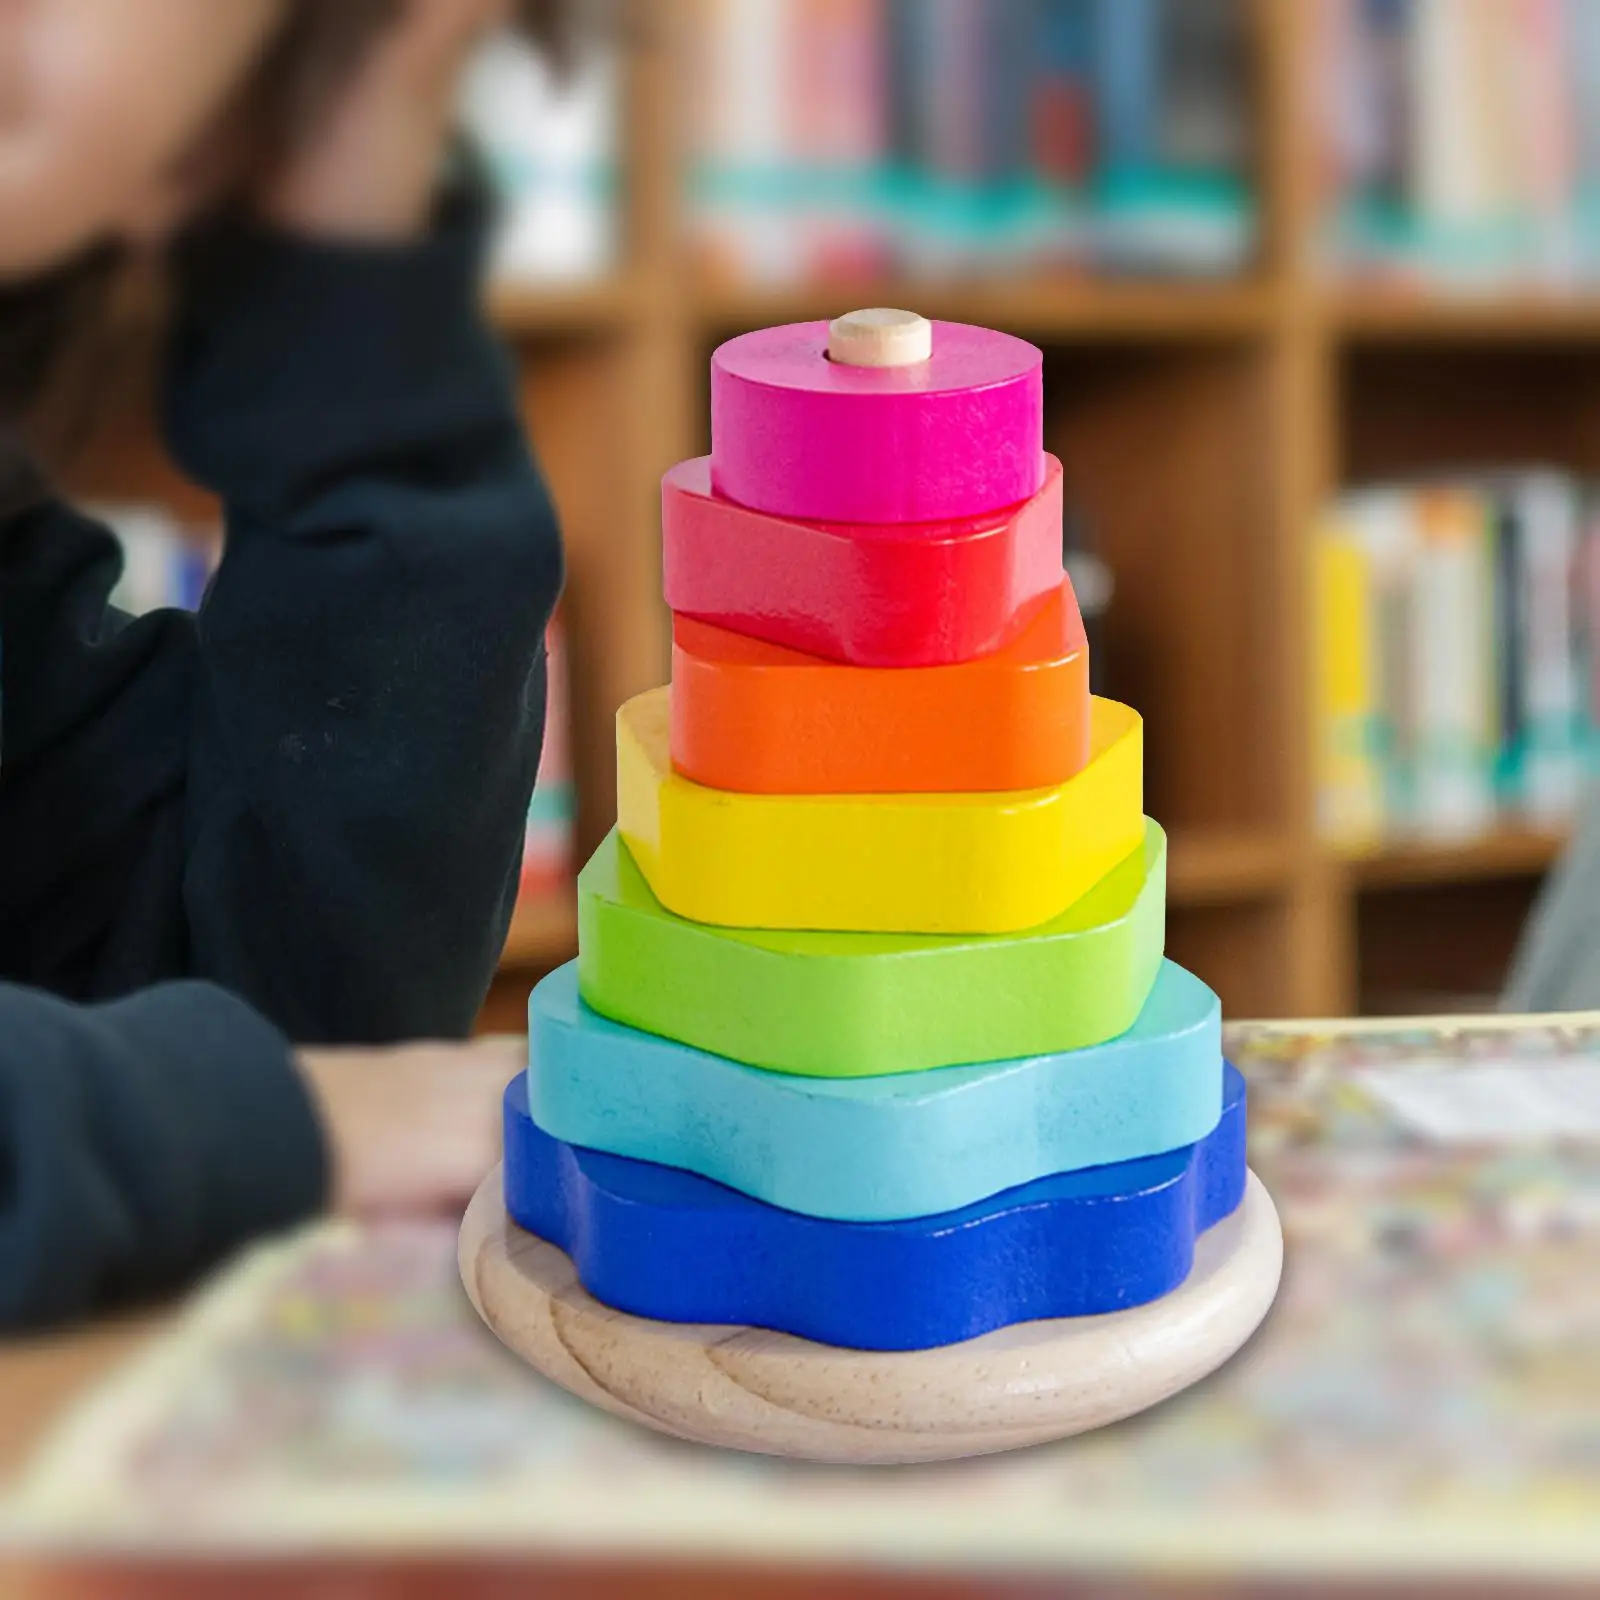 Colorful Stacking Tower Shape and Color Motor Skill Early Learning Wood Building Blocks for School Home Age 2+ Years Baby